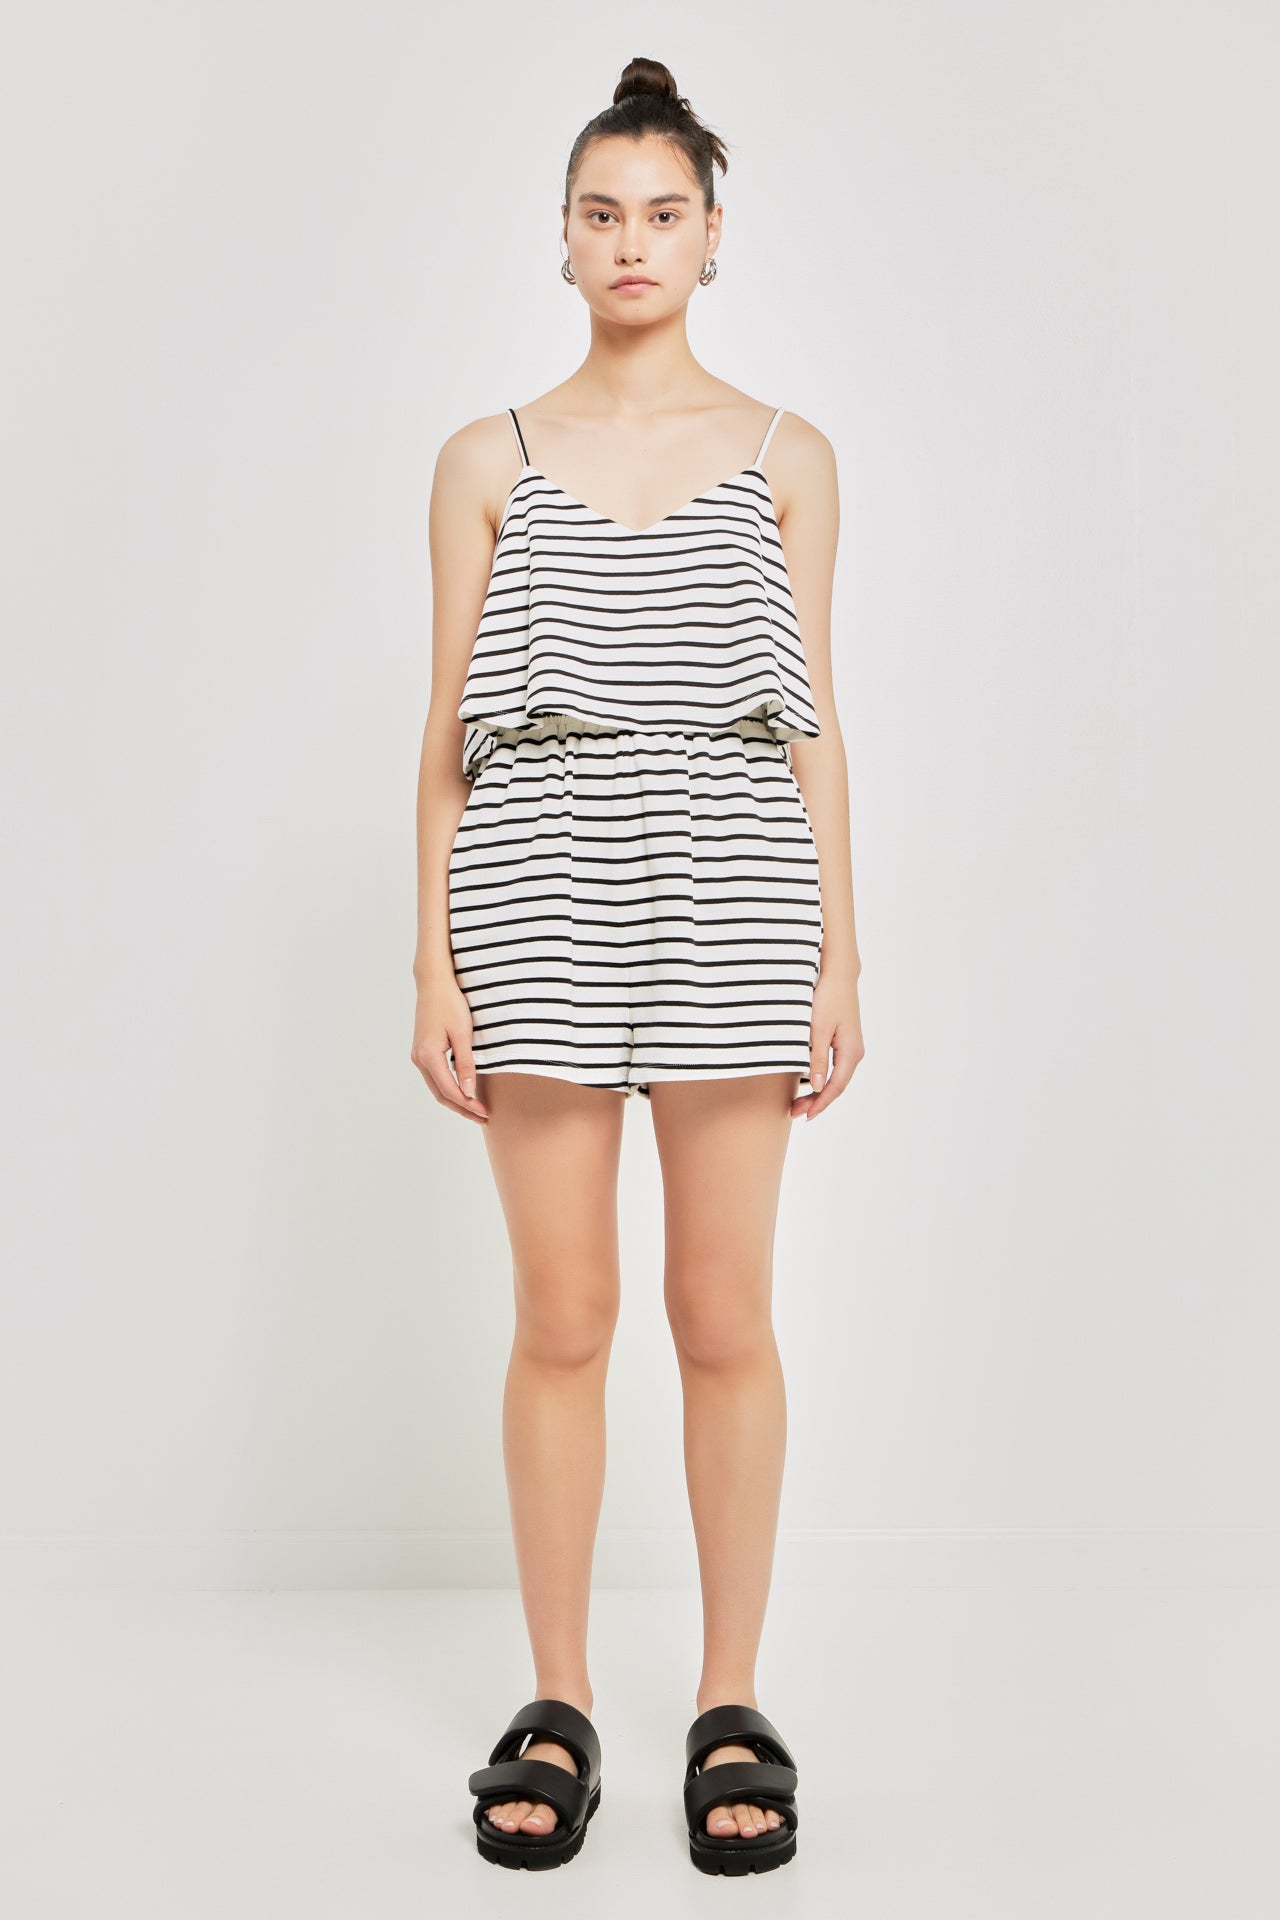 GREY LAB - Stripe Knit Romper - ROMPERS available at Objectrare